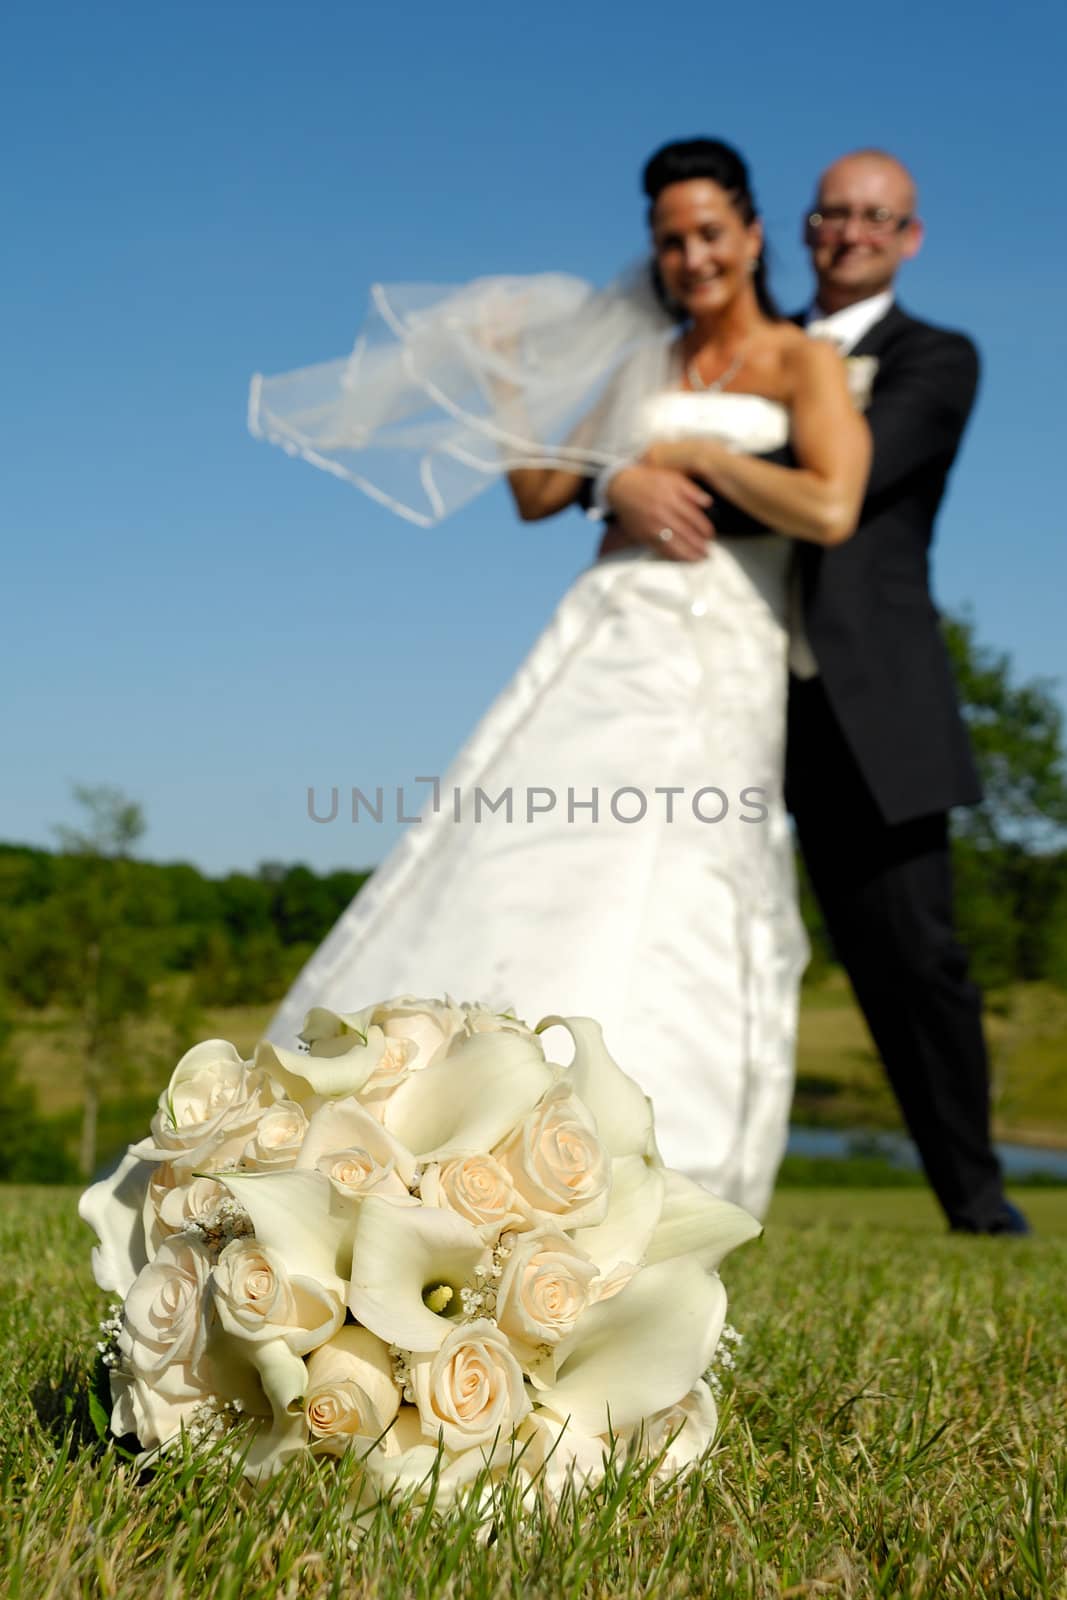 Wedding bouquet in focus and couple in blur